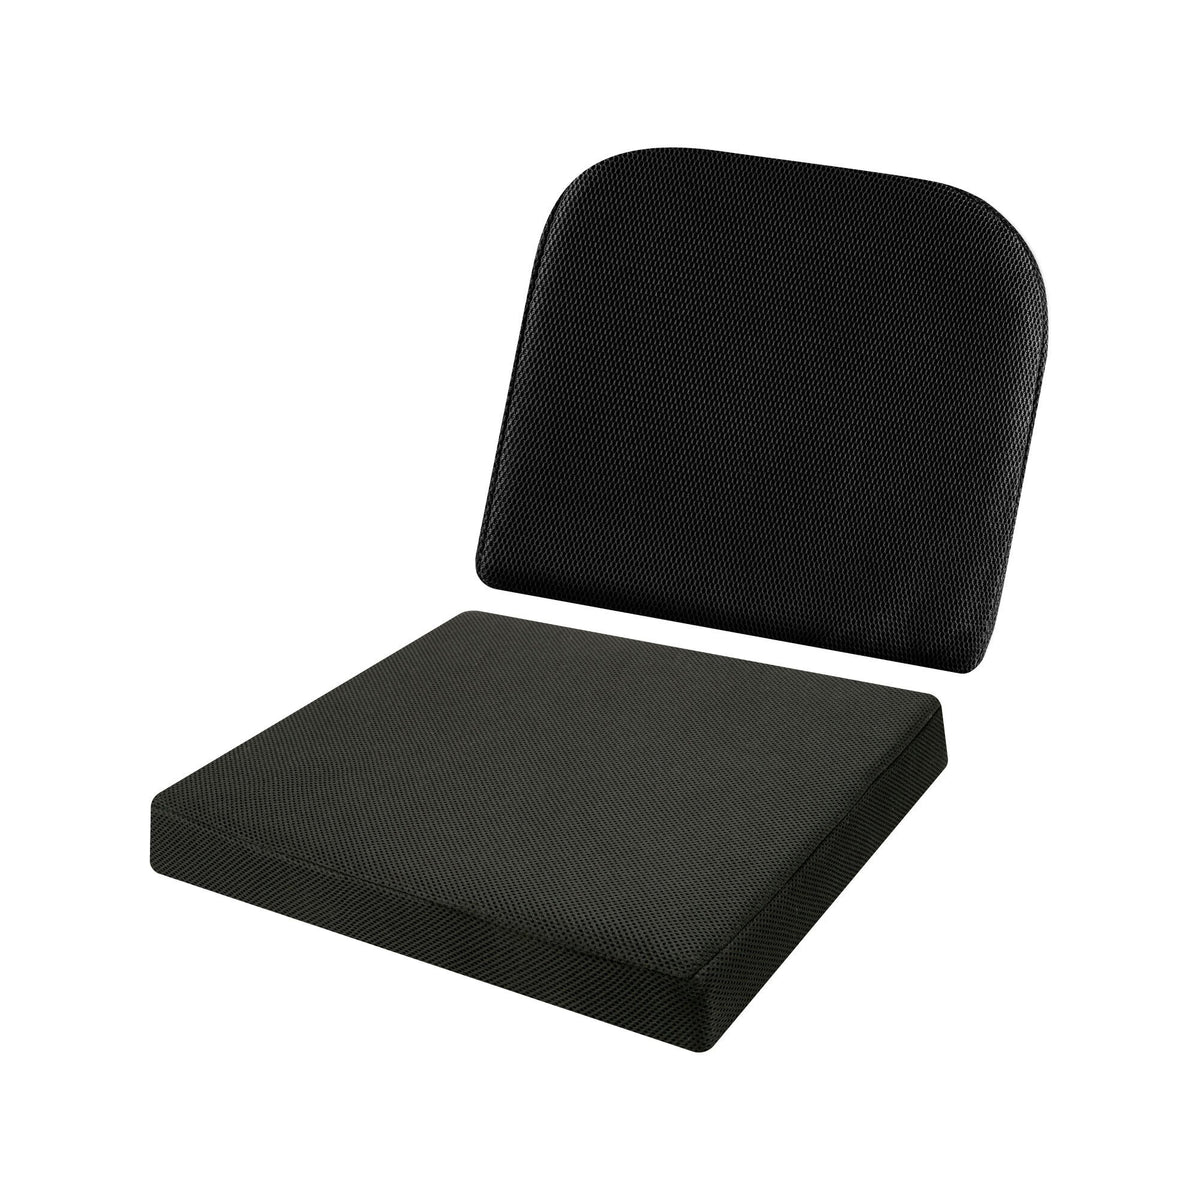 Air Cushion Breathable and Comfortable Square Seat Pad for Bed